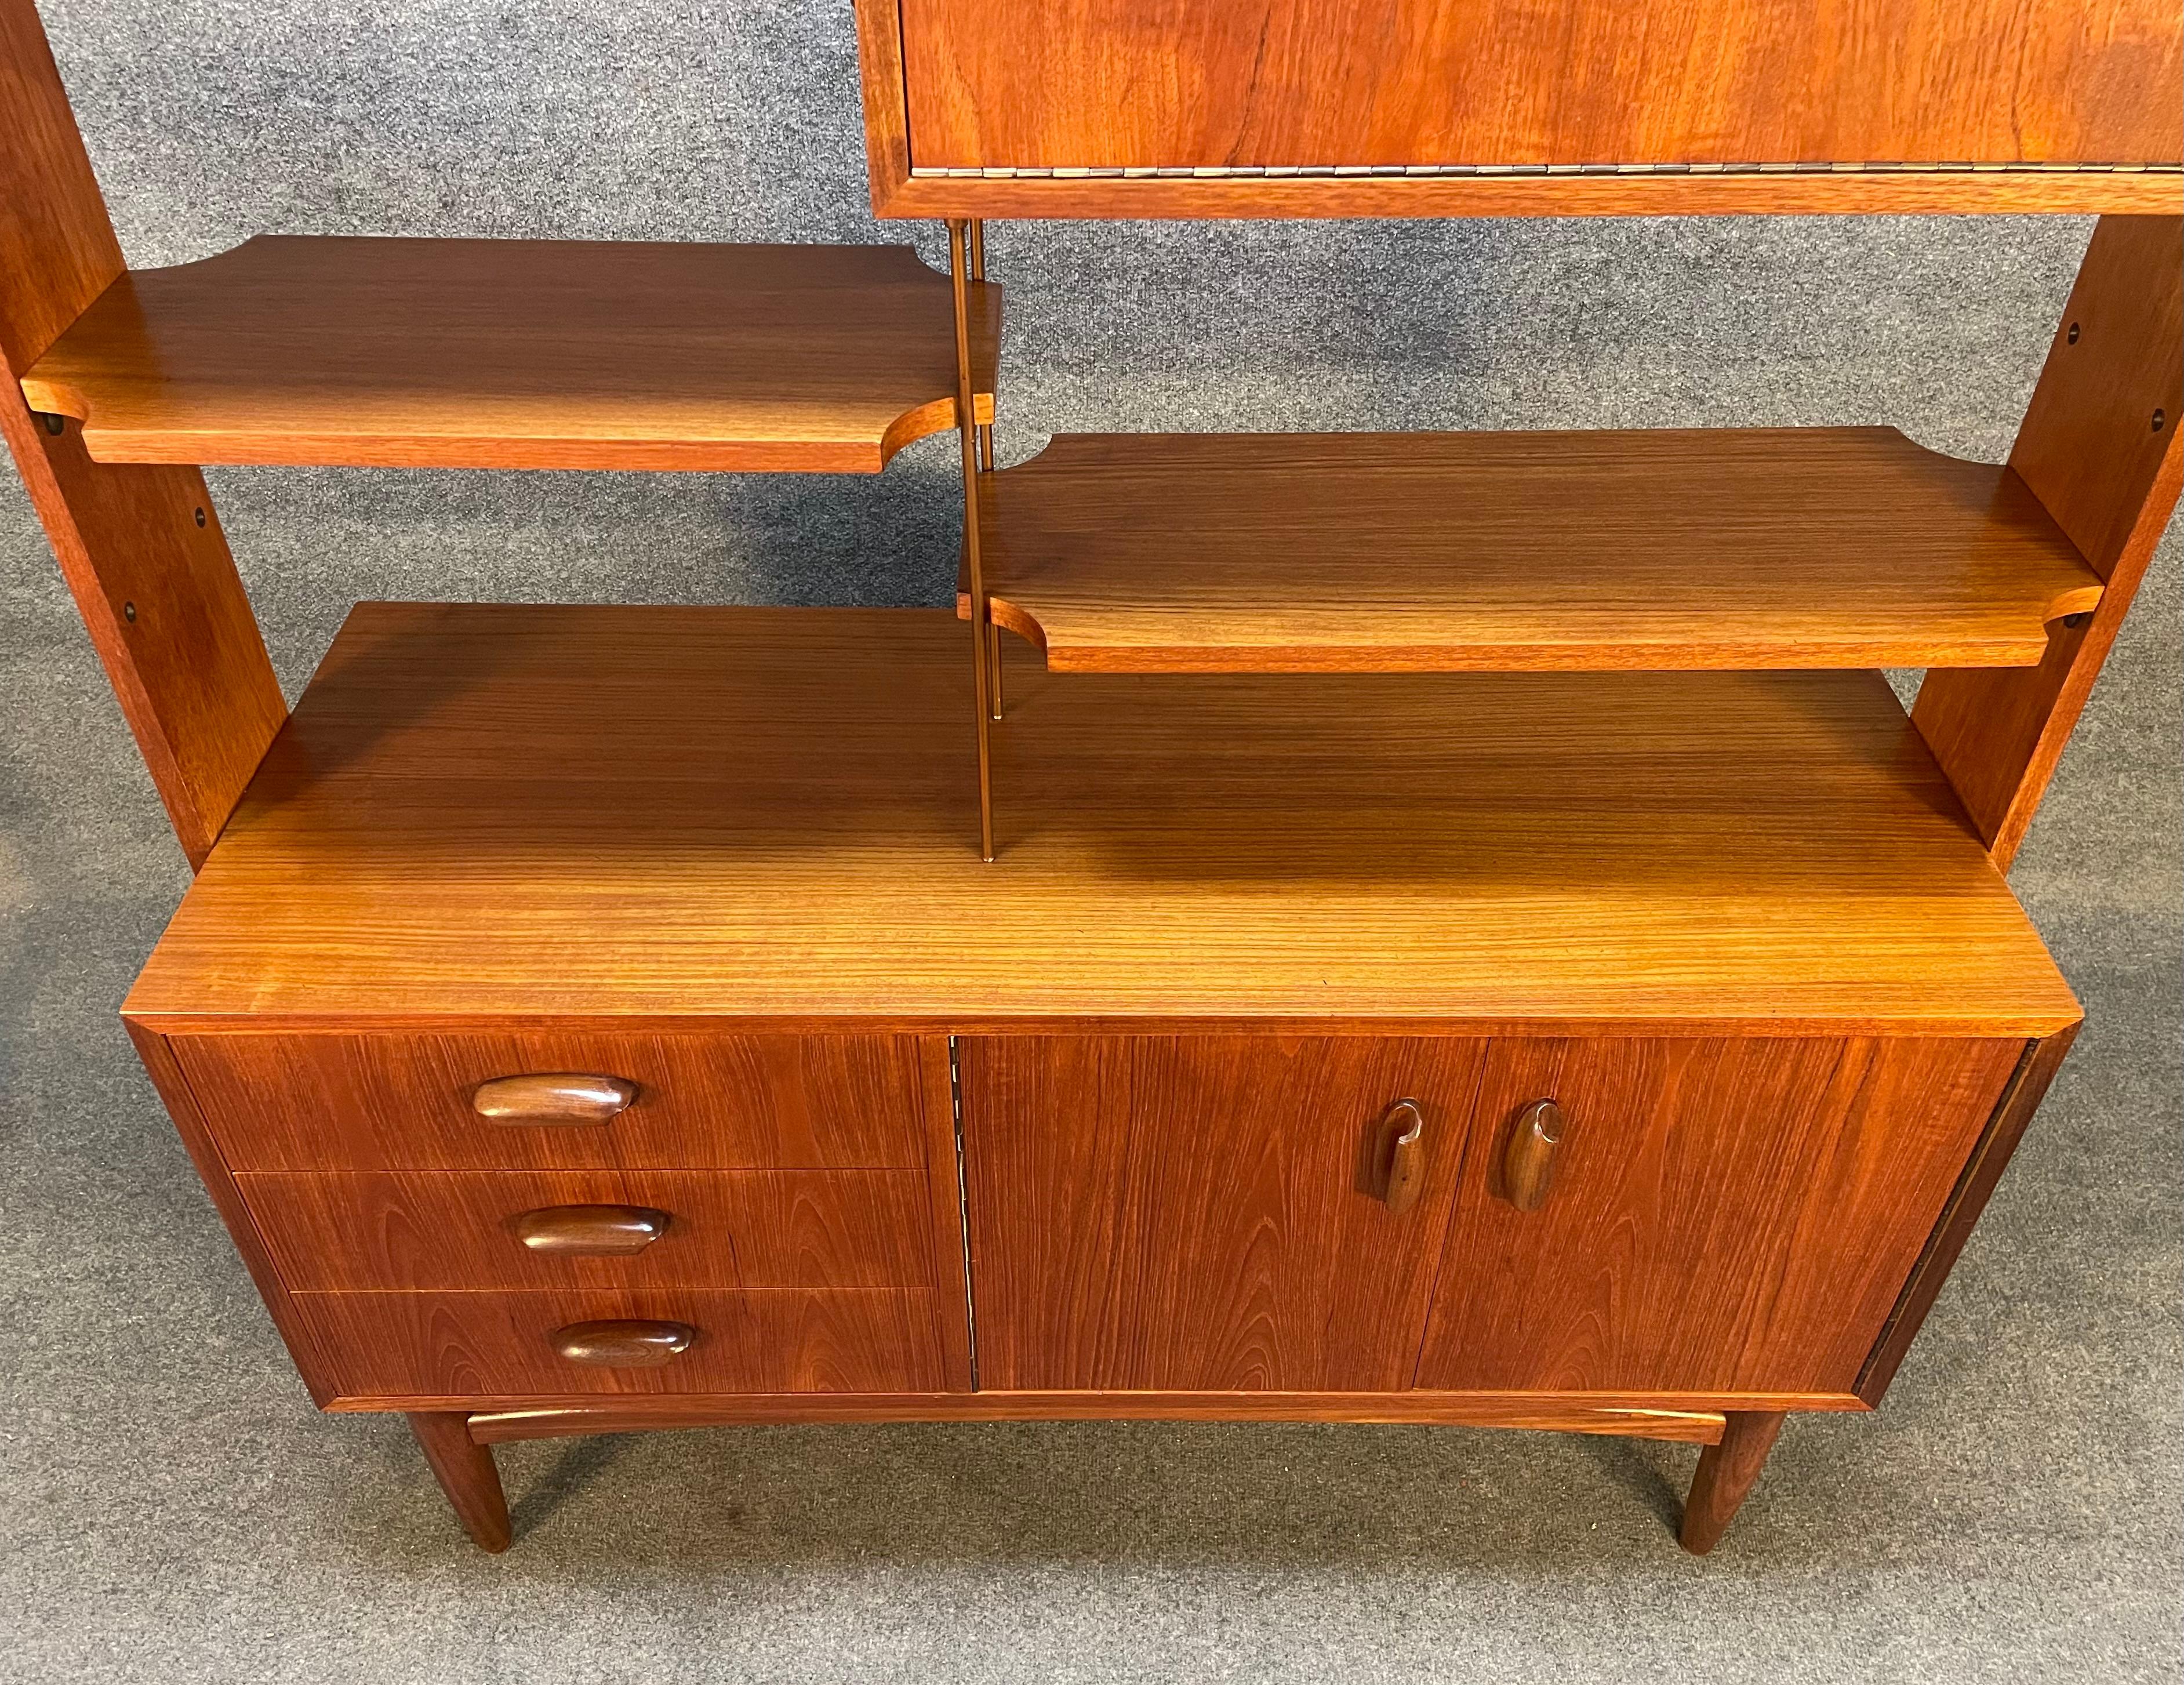 Here is a beautiful British Mid-Century Modern hutch-room divider in teak manufactured by G Plan in the UK in the 1960's 
This special piece, recently imported from England to California before its refinishing, features a vibrant wood grain,